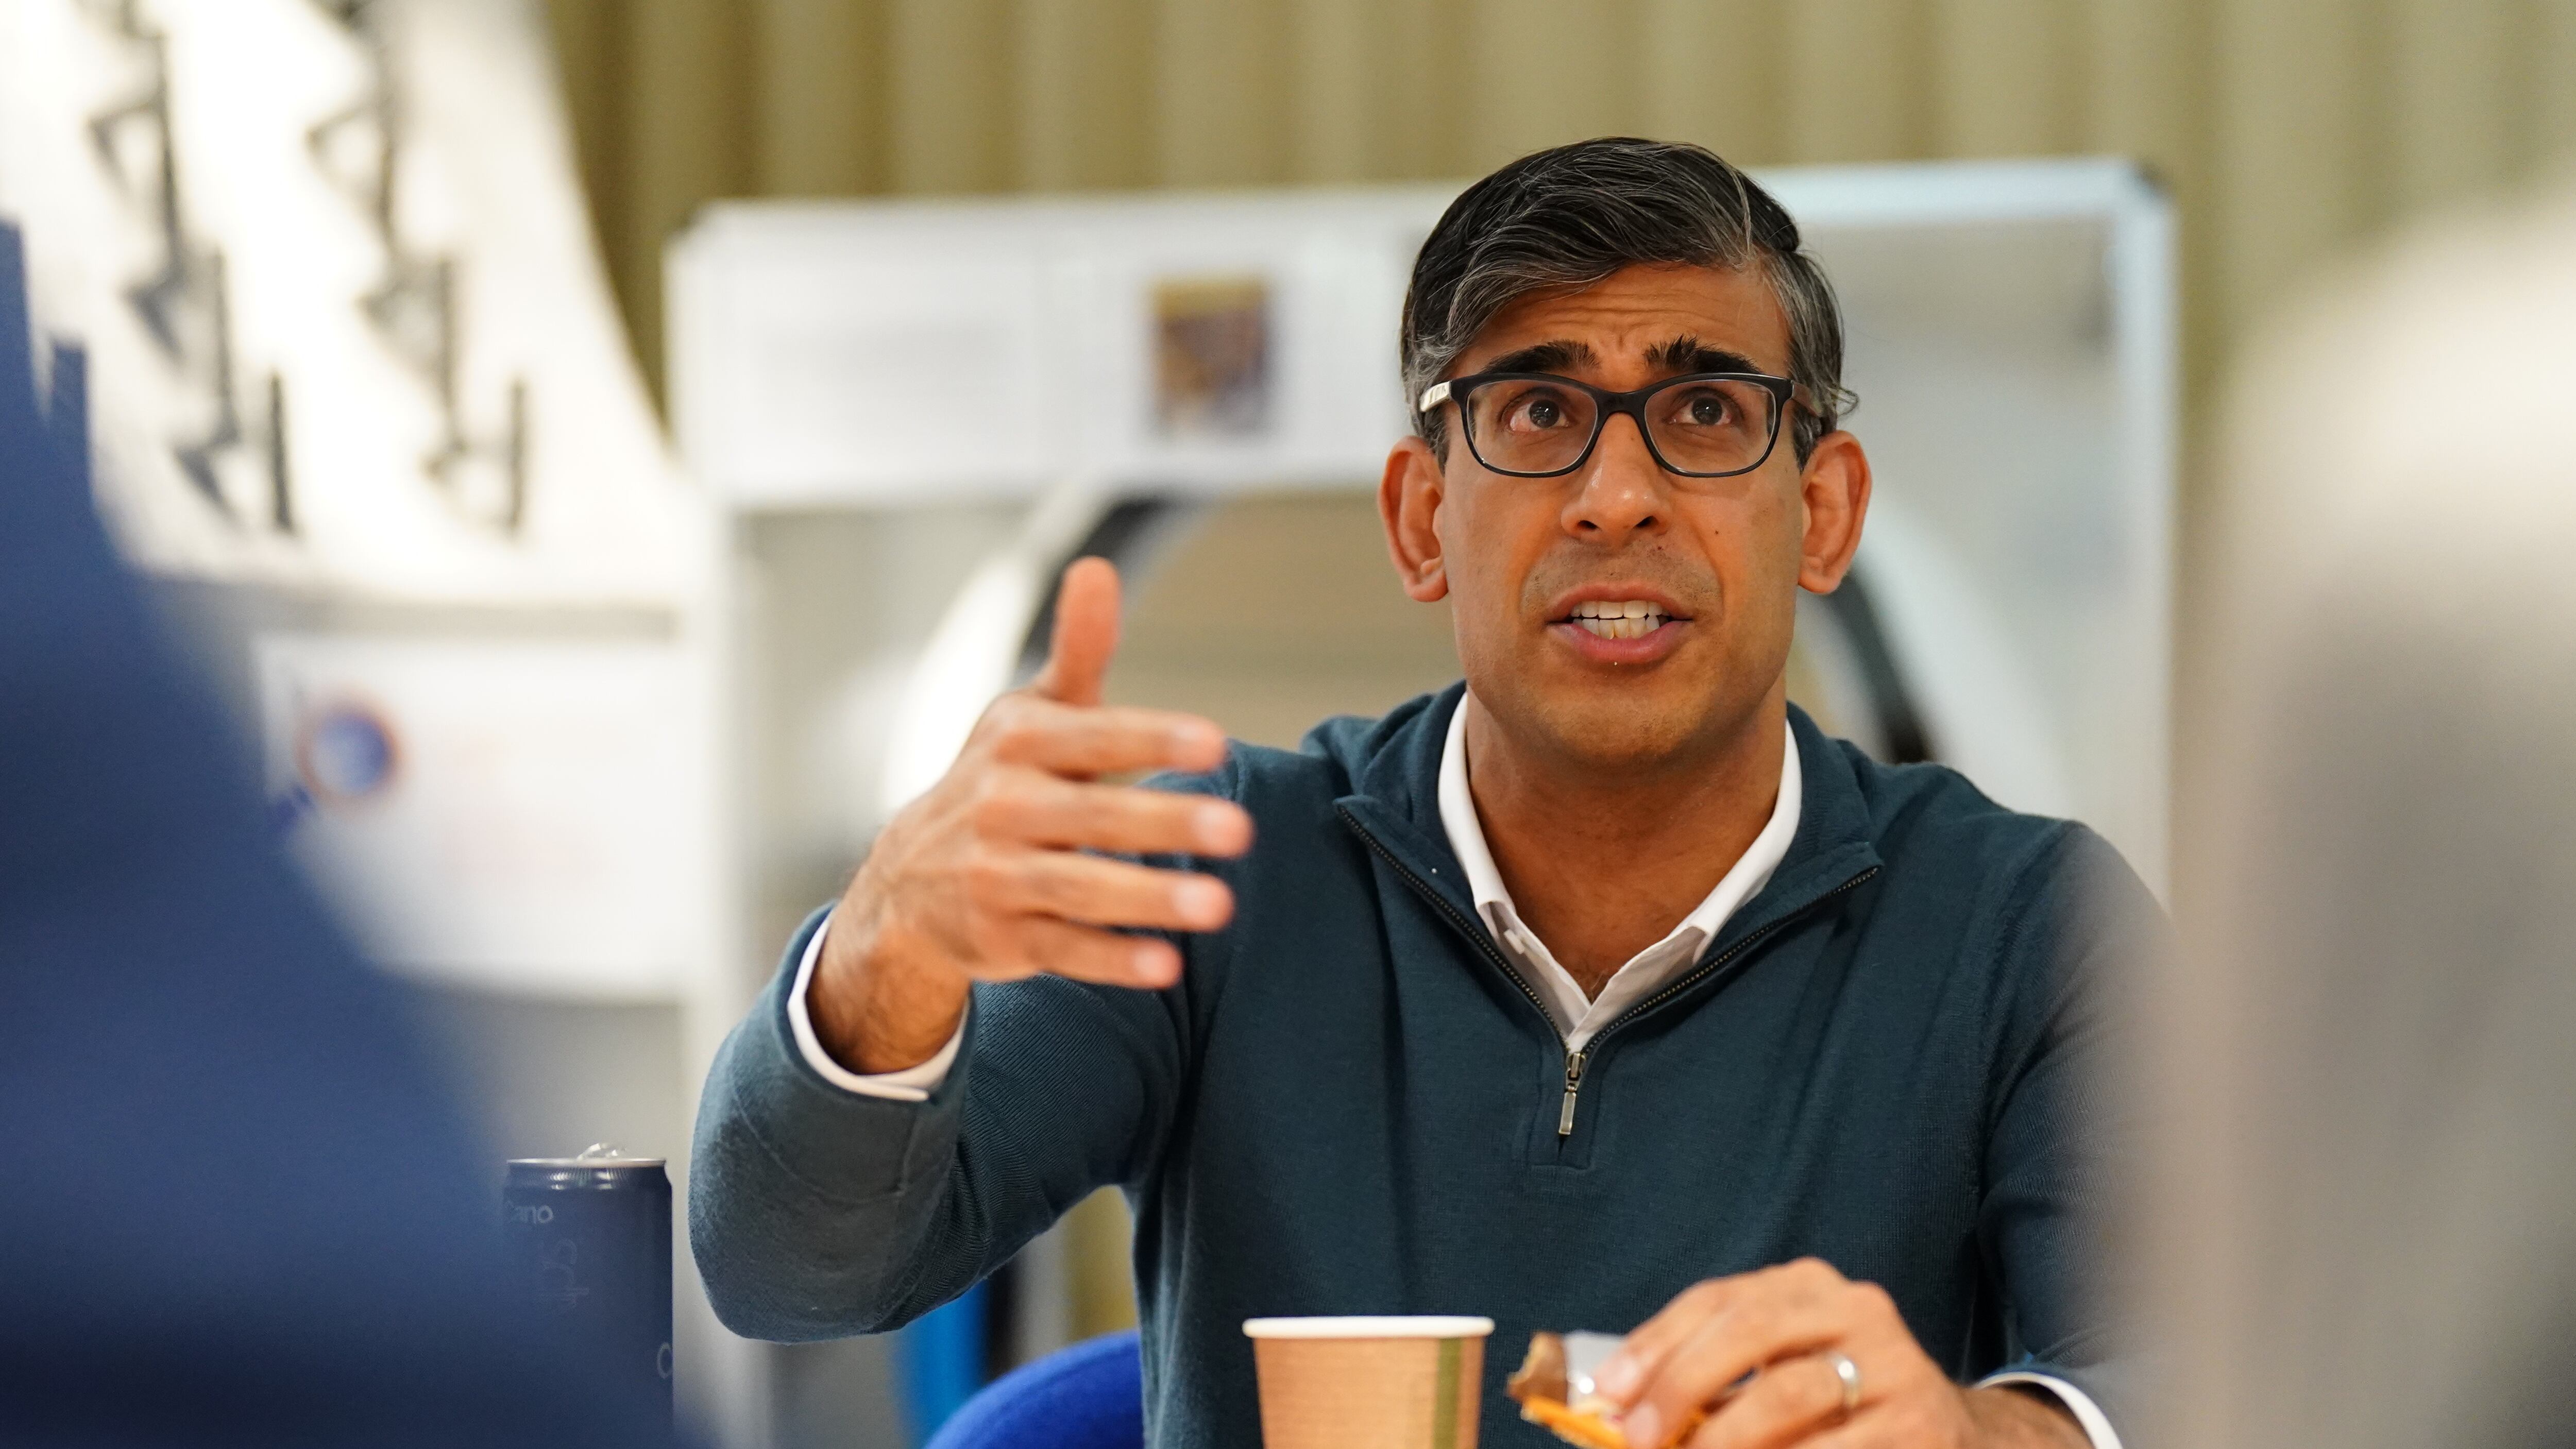 Rishi Sunak answered questions from members of the public